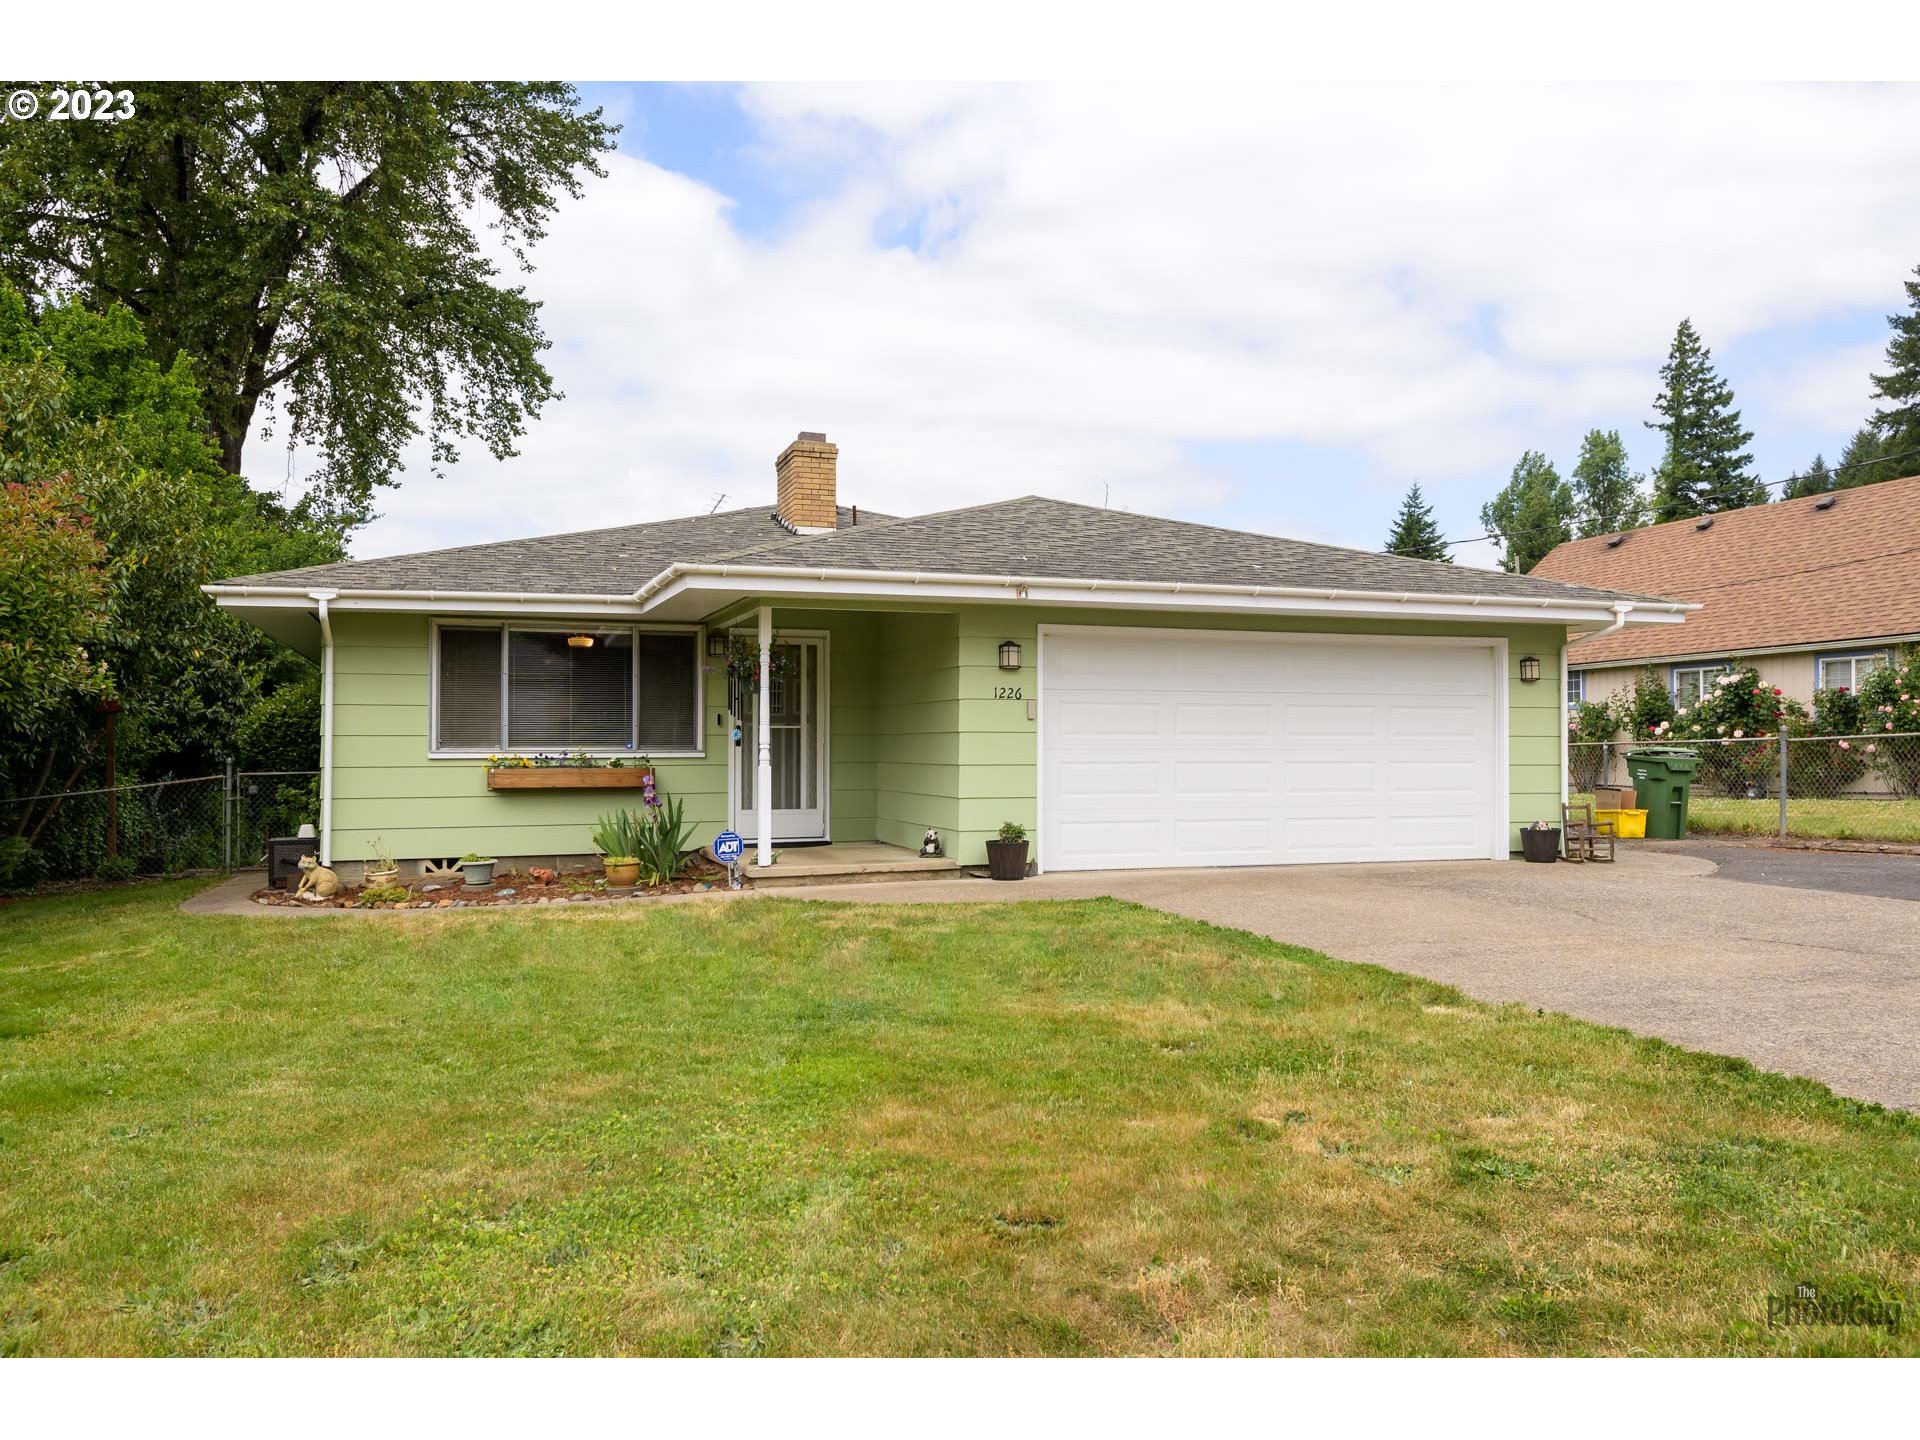 1226 TYLER AVE, Cottage Grove, OR 97424